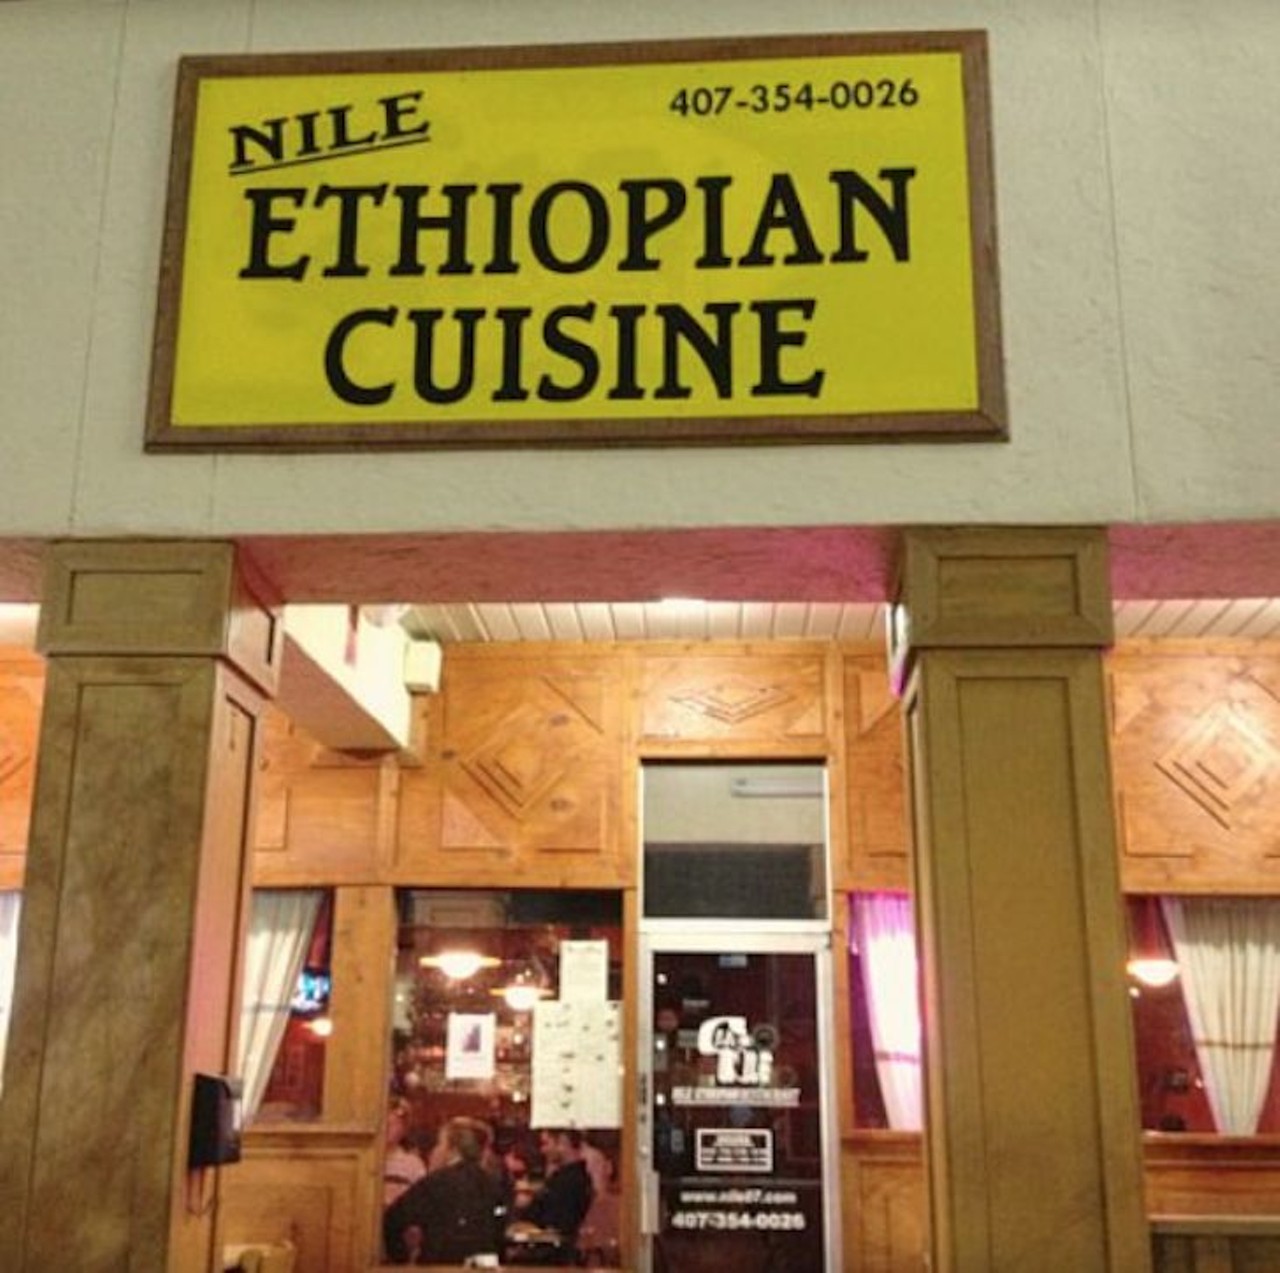 Nile Ethiopian Restaurant
7048 International Drive, 407- 354-0026 
Estimated Uber ride from Convention Center: 9 minutes
Orlando&#146;s lone Ethiopian restaurant is a blessing for foodies with an appetite for the exotic. Utensils come in the form of pancake-like sourdough bread called injera, used to scoop intensely spiced dishes from a large communal platter. Be sure to sample traditional honey wine as well as Ethiopian coffee, brewed in a clay pot.
Photo via Photo by Nile Ethiopian Restaurant